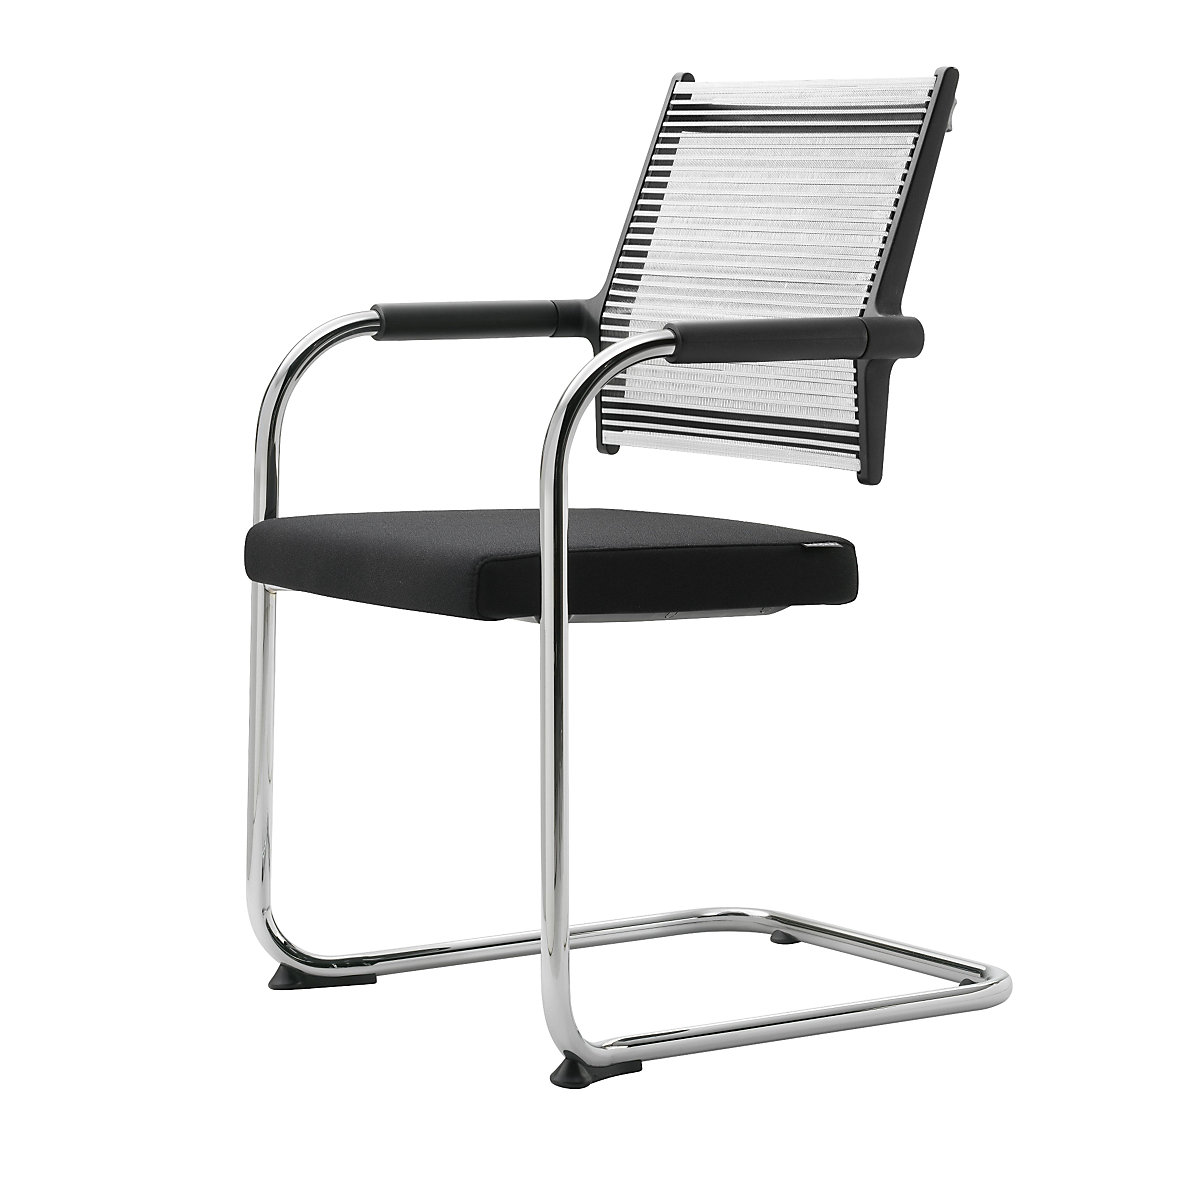 LORDO cantilever chair – Dauphin